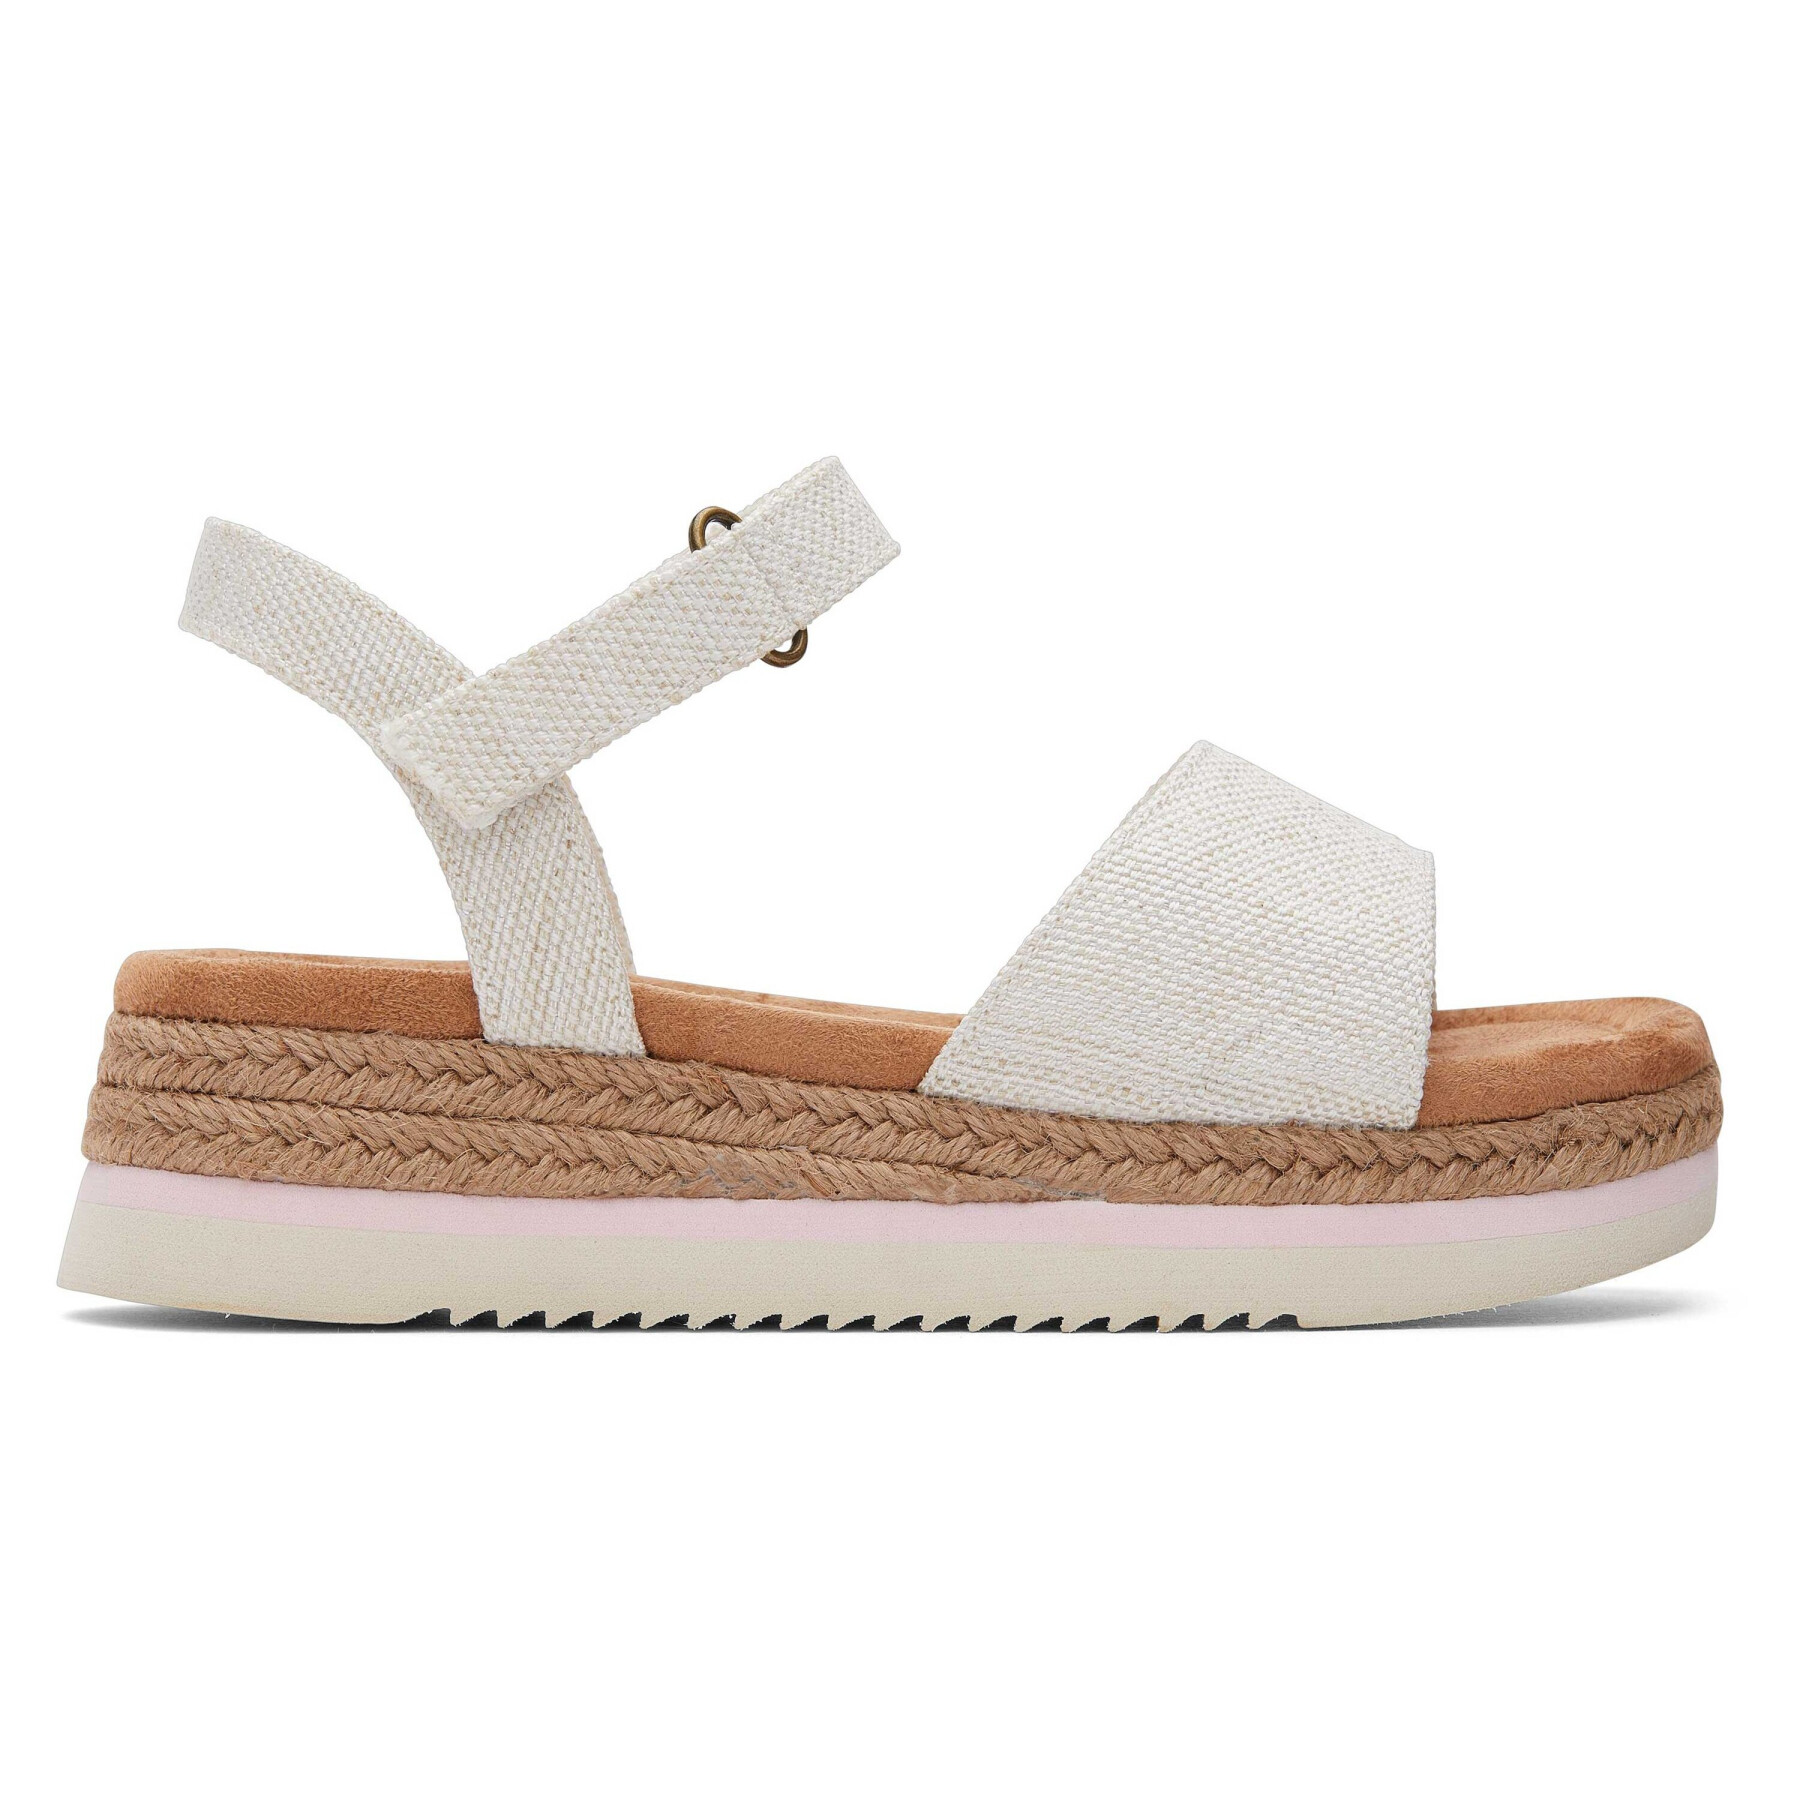 Girl's sandals Toms Diana